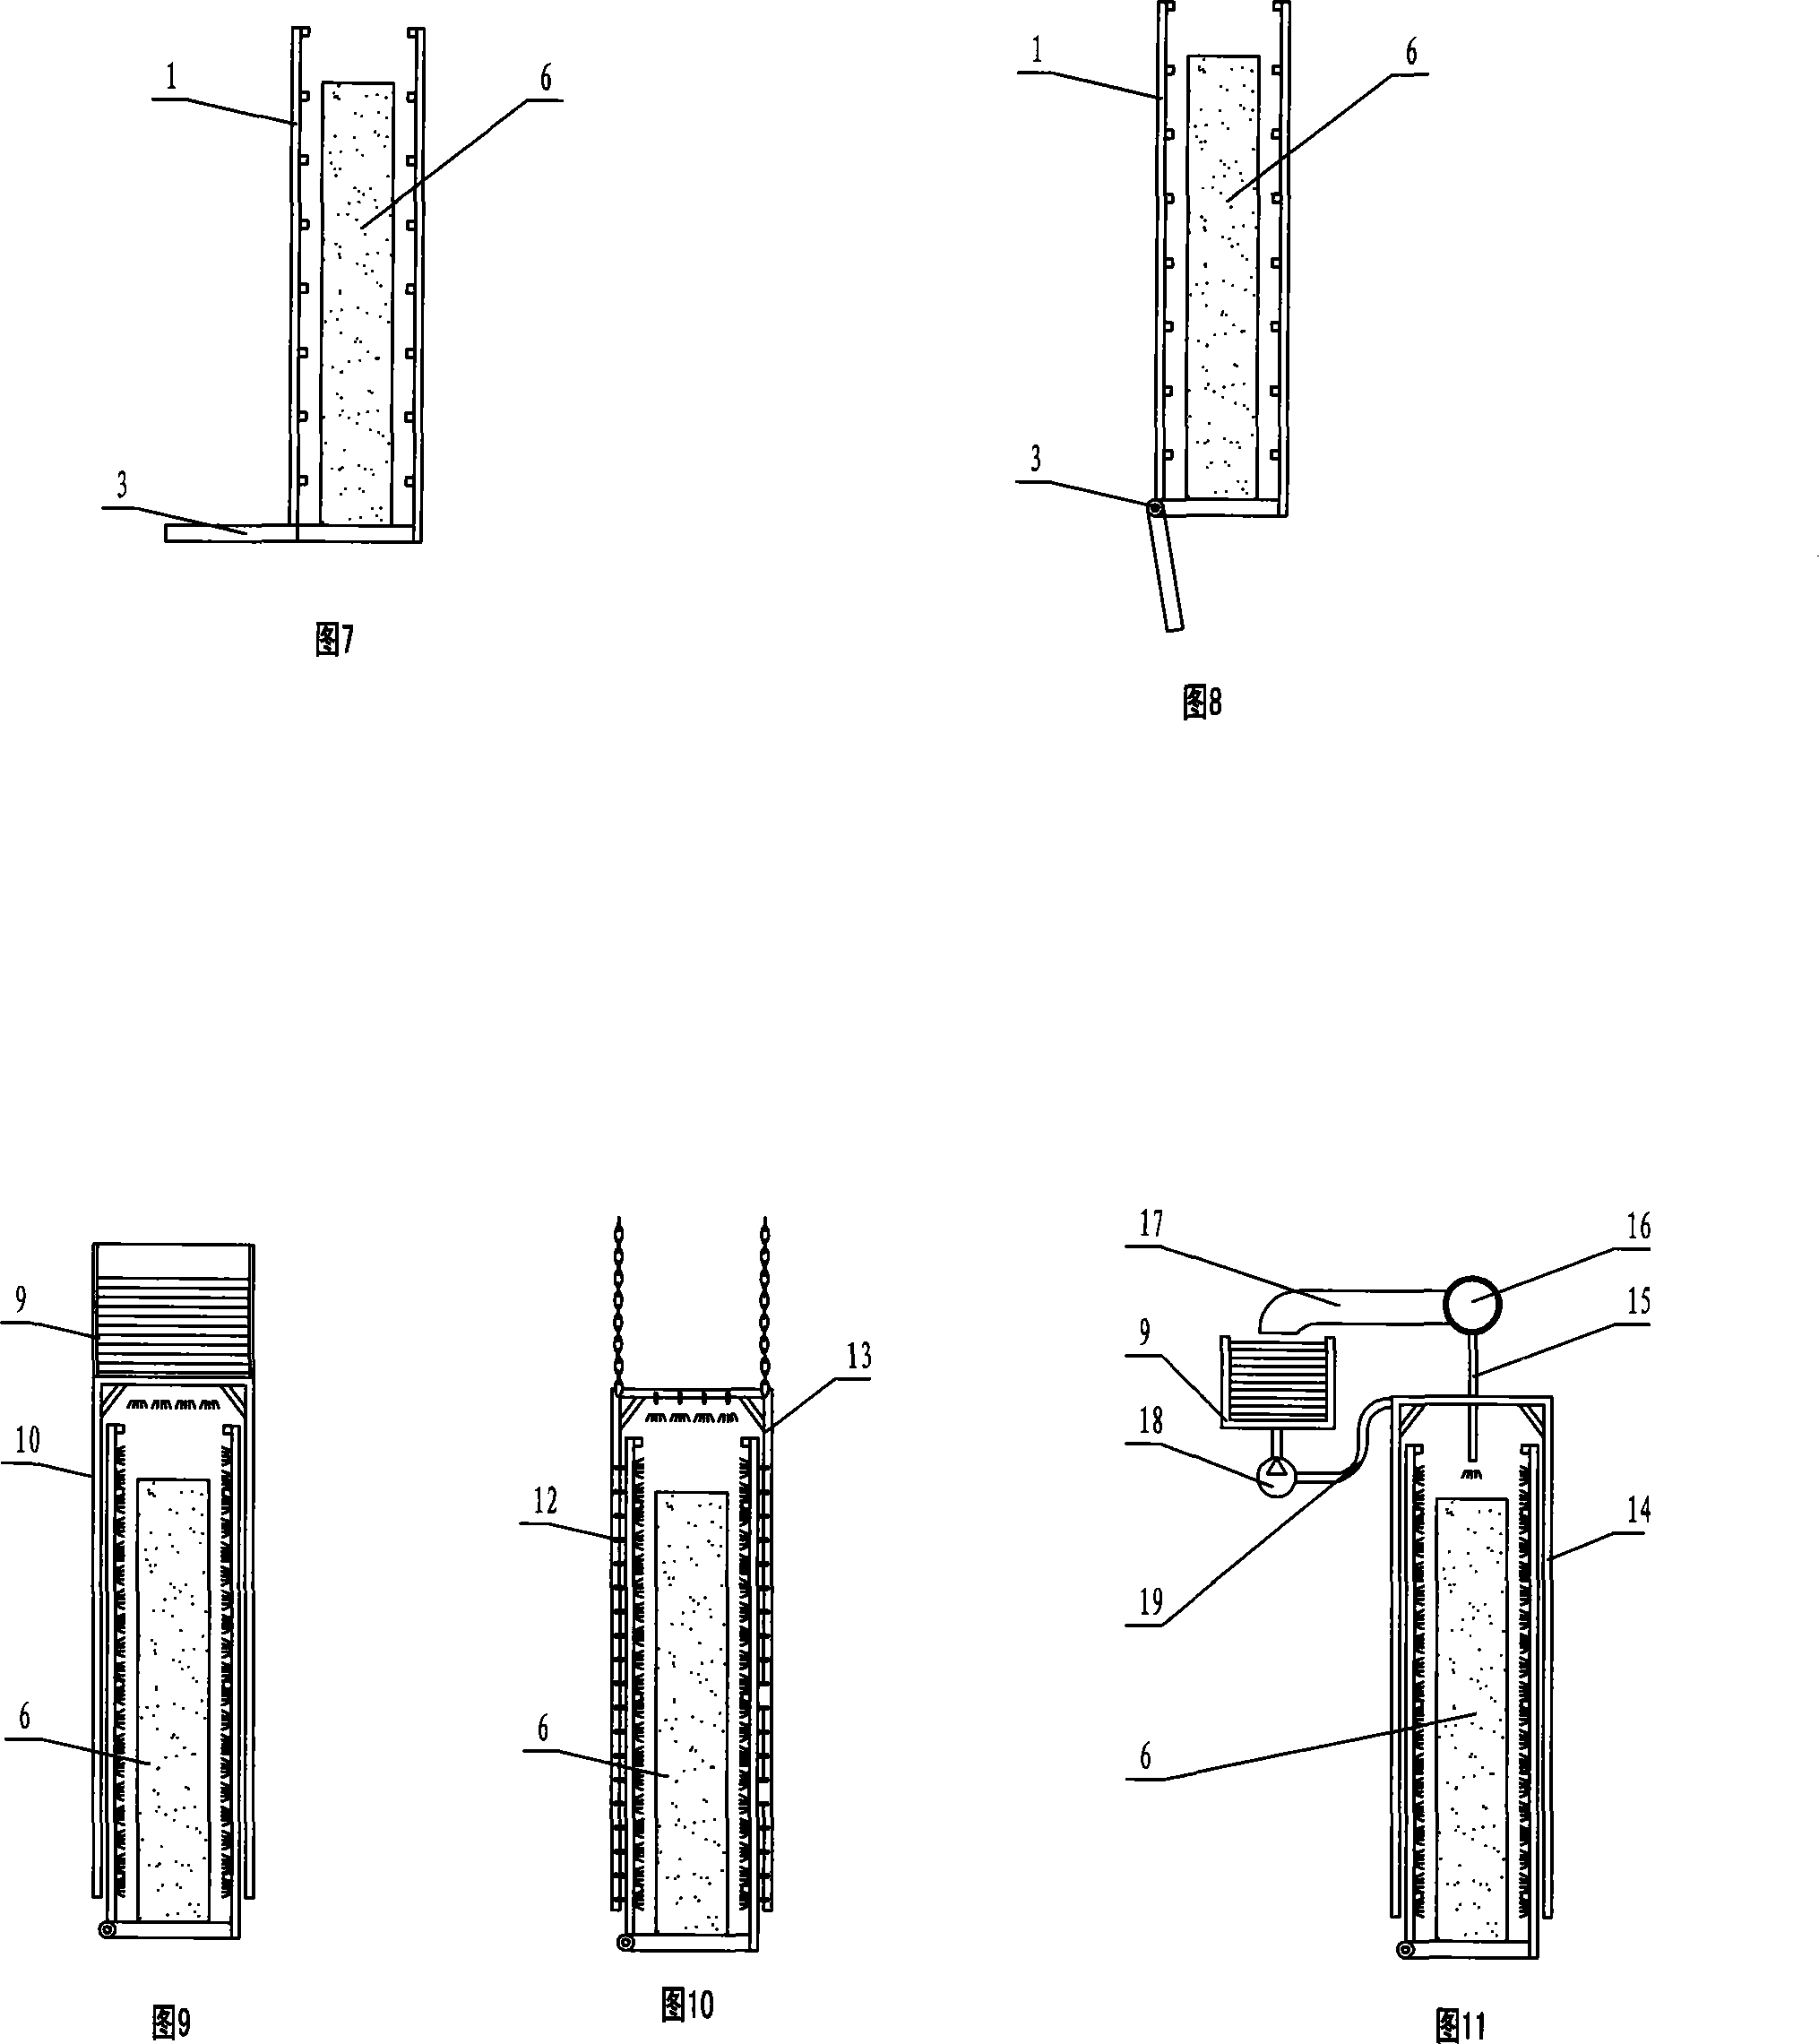 Upright coke-oven transition purification receiving and extinguishing technique and equipment